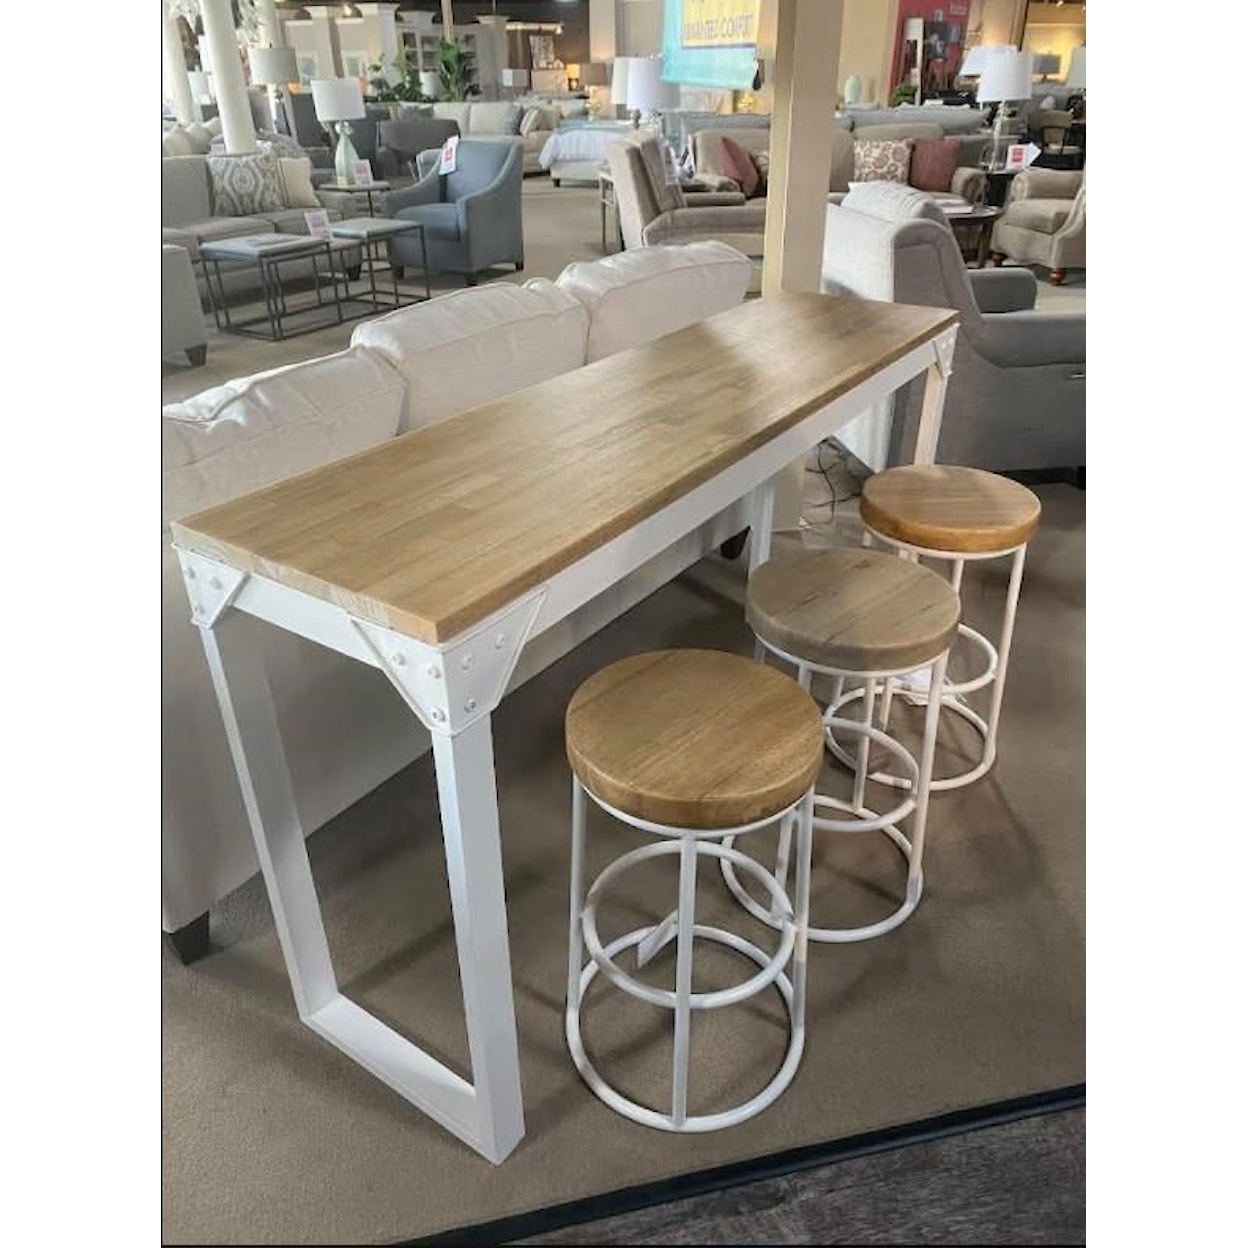 Bramble Urban Yosemite Counter Height Table with 3 Stools